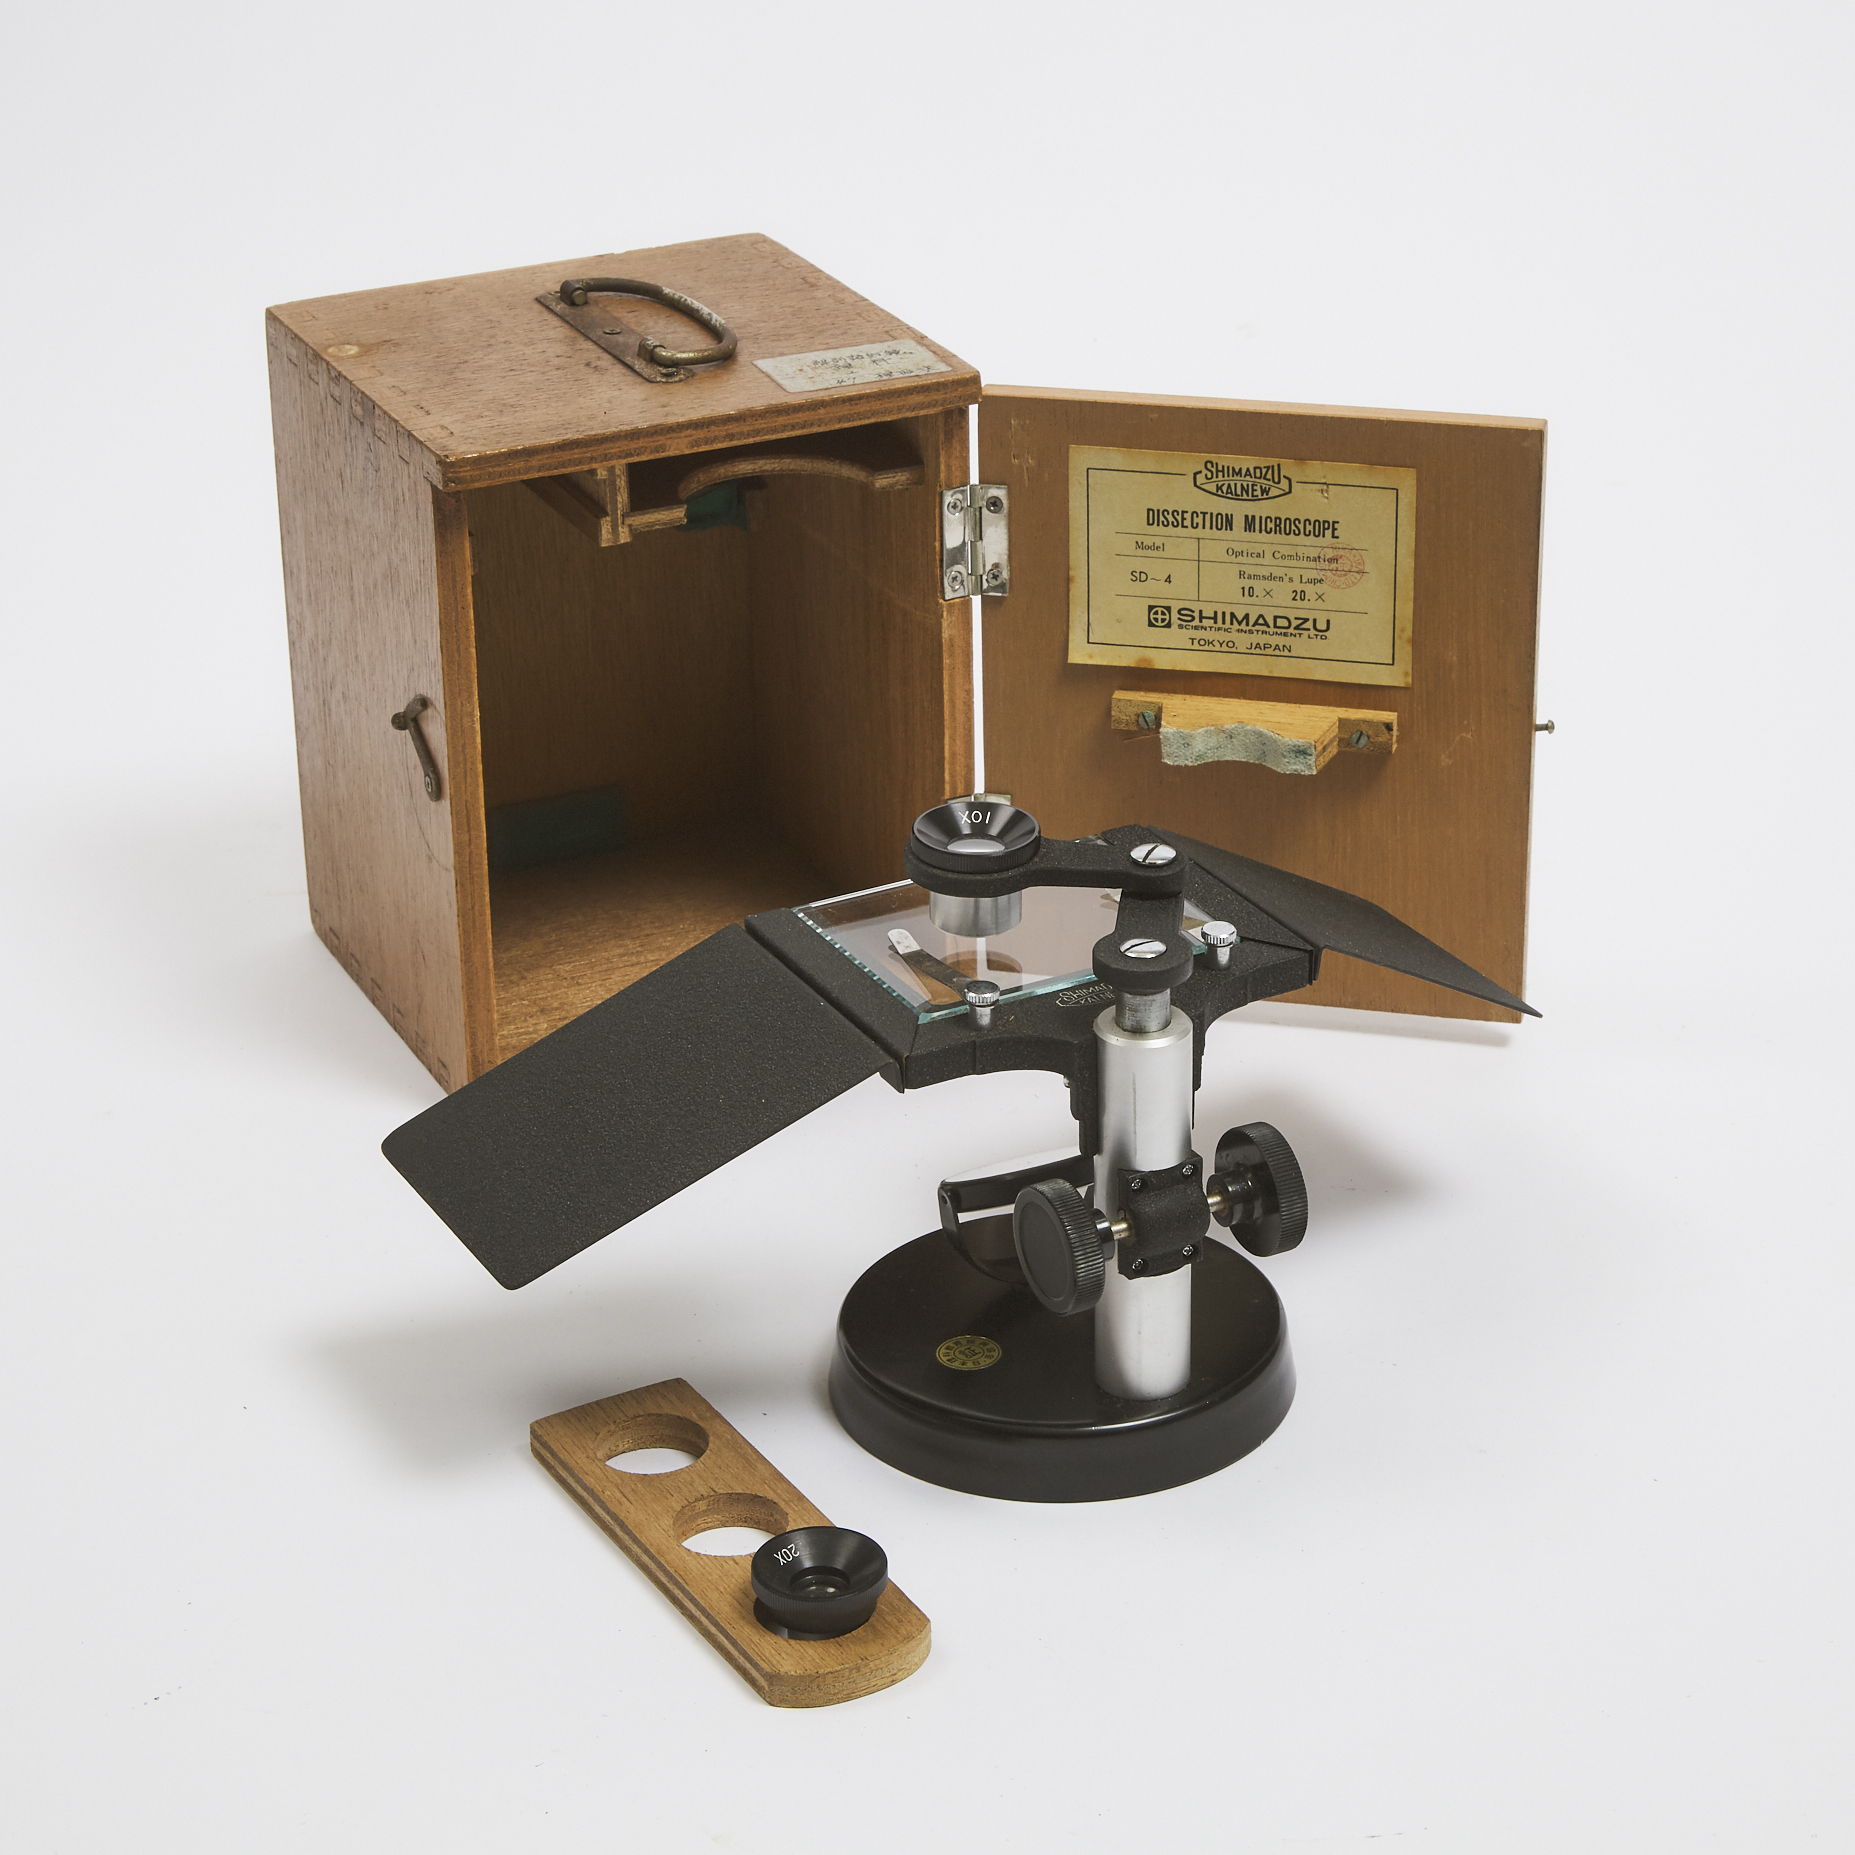 Japanese Dissecting Microscope,